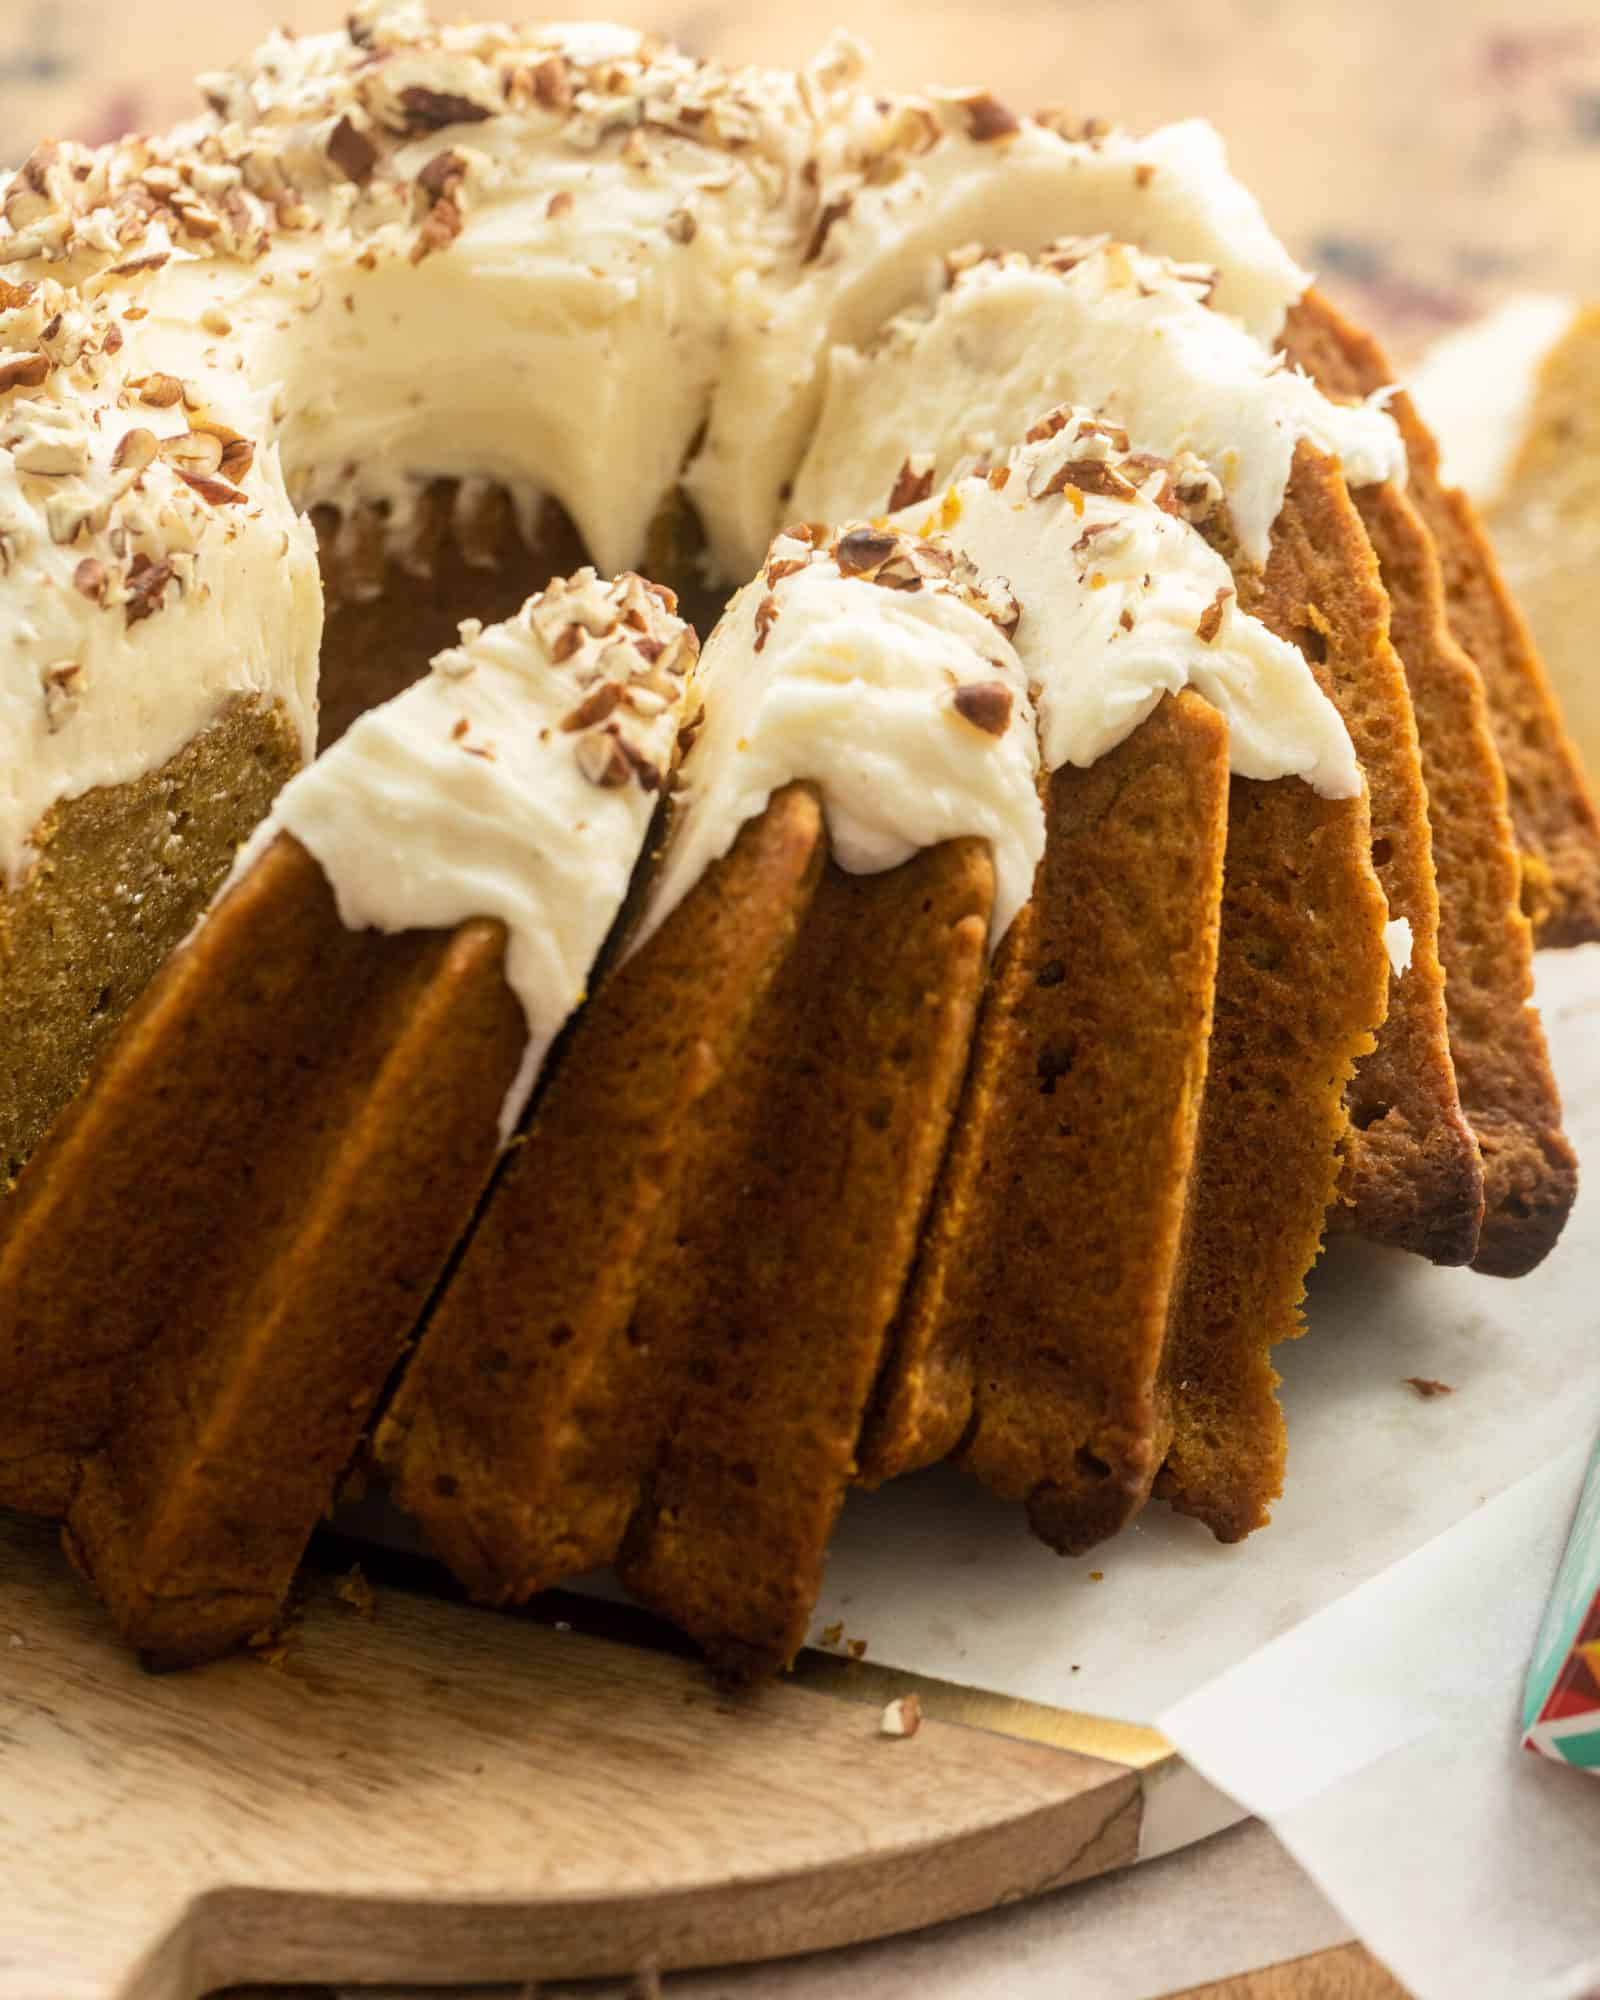 Close up view of sliced Pound Cake with Cream Cheese Frosting garnished with chopped walnuts.